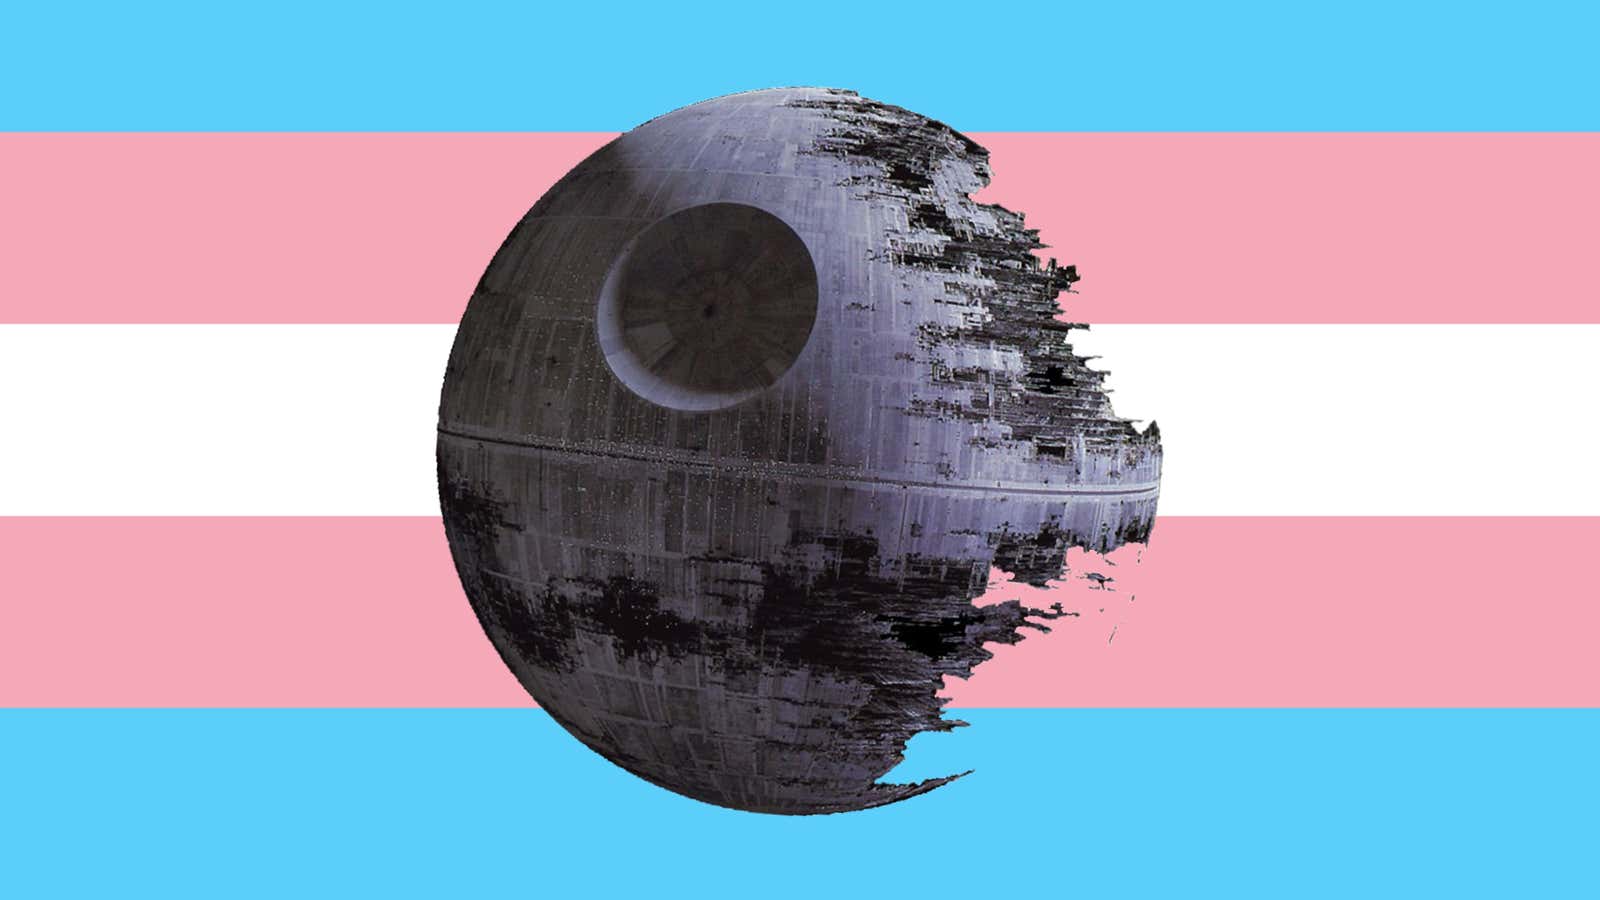 How <i>Star Wars</i>' Biggest Fan Wiki Found Itself in a Fight Over Trans Identity